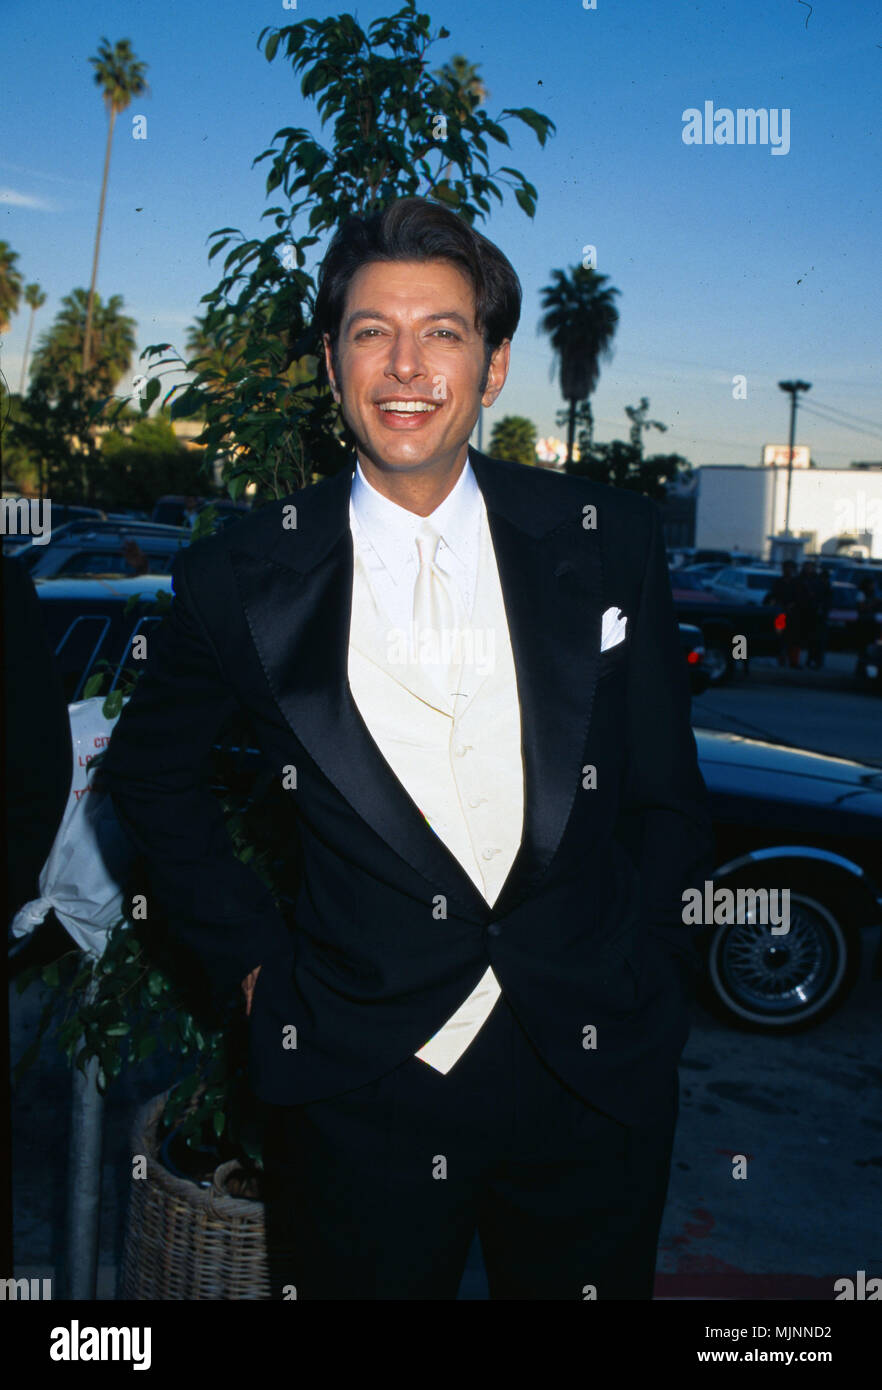 Actor Jeff Goldblum --- ' Tsuni / USA 'Jeff Goldblum    Jeff Goldblum    Celebrities fashion / Three Quarters from the Red Carpet-1994-2000, one person, Vertical, Best of, Hollywood Life, Event in Hollywood Life - California,  Red Carpet Event, Vertical, USA, Film Industry, Celebrities,  Photography, Bestof, Arts Culture and Entertainment, , , Topix  Jeff Goldblum    Event in Hollywood Life - California,  Red Carpet Event, Vertical, USA, Film Industry, Celebrities,  Photography, Bestof, Arts Culture and Entertainment, , , Topix  Celebrities fashion / Three Quarters from the Red Carpet-1994-200 Stock Photo